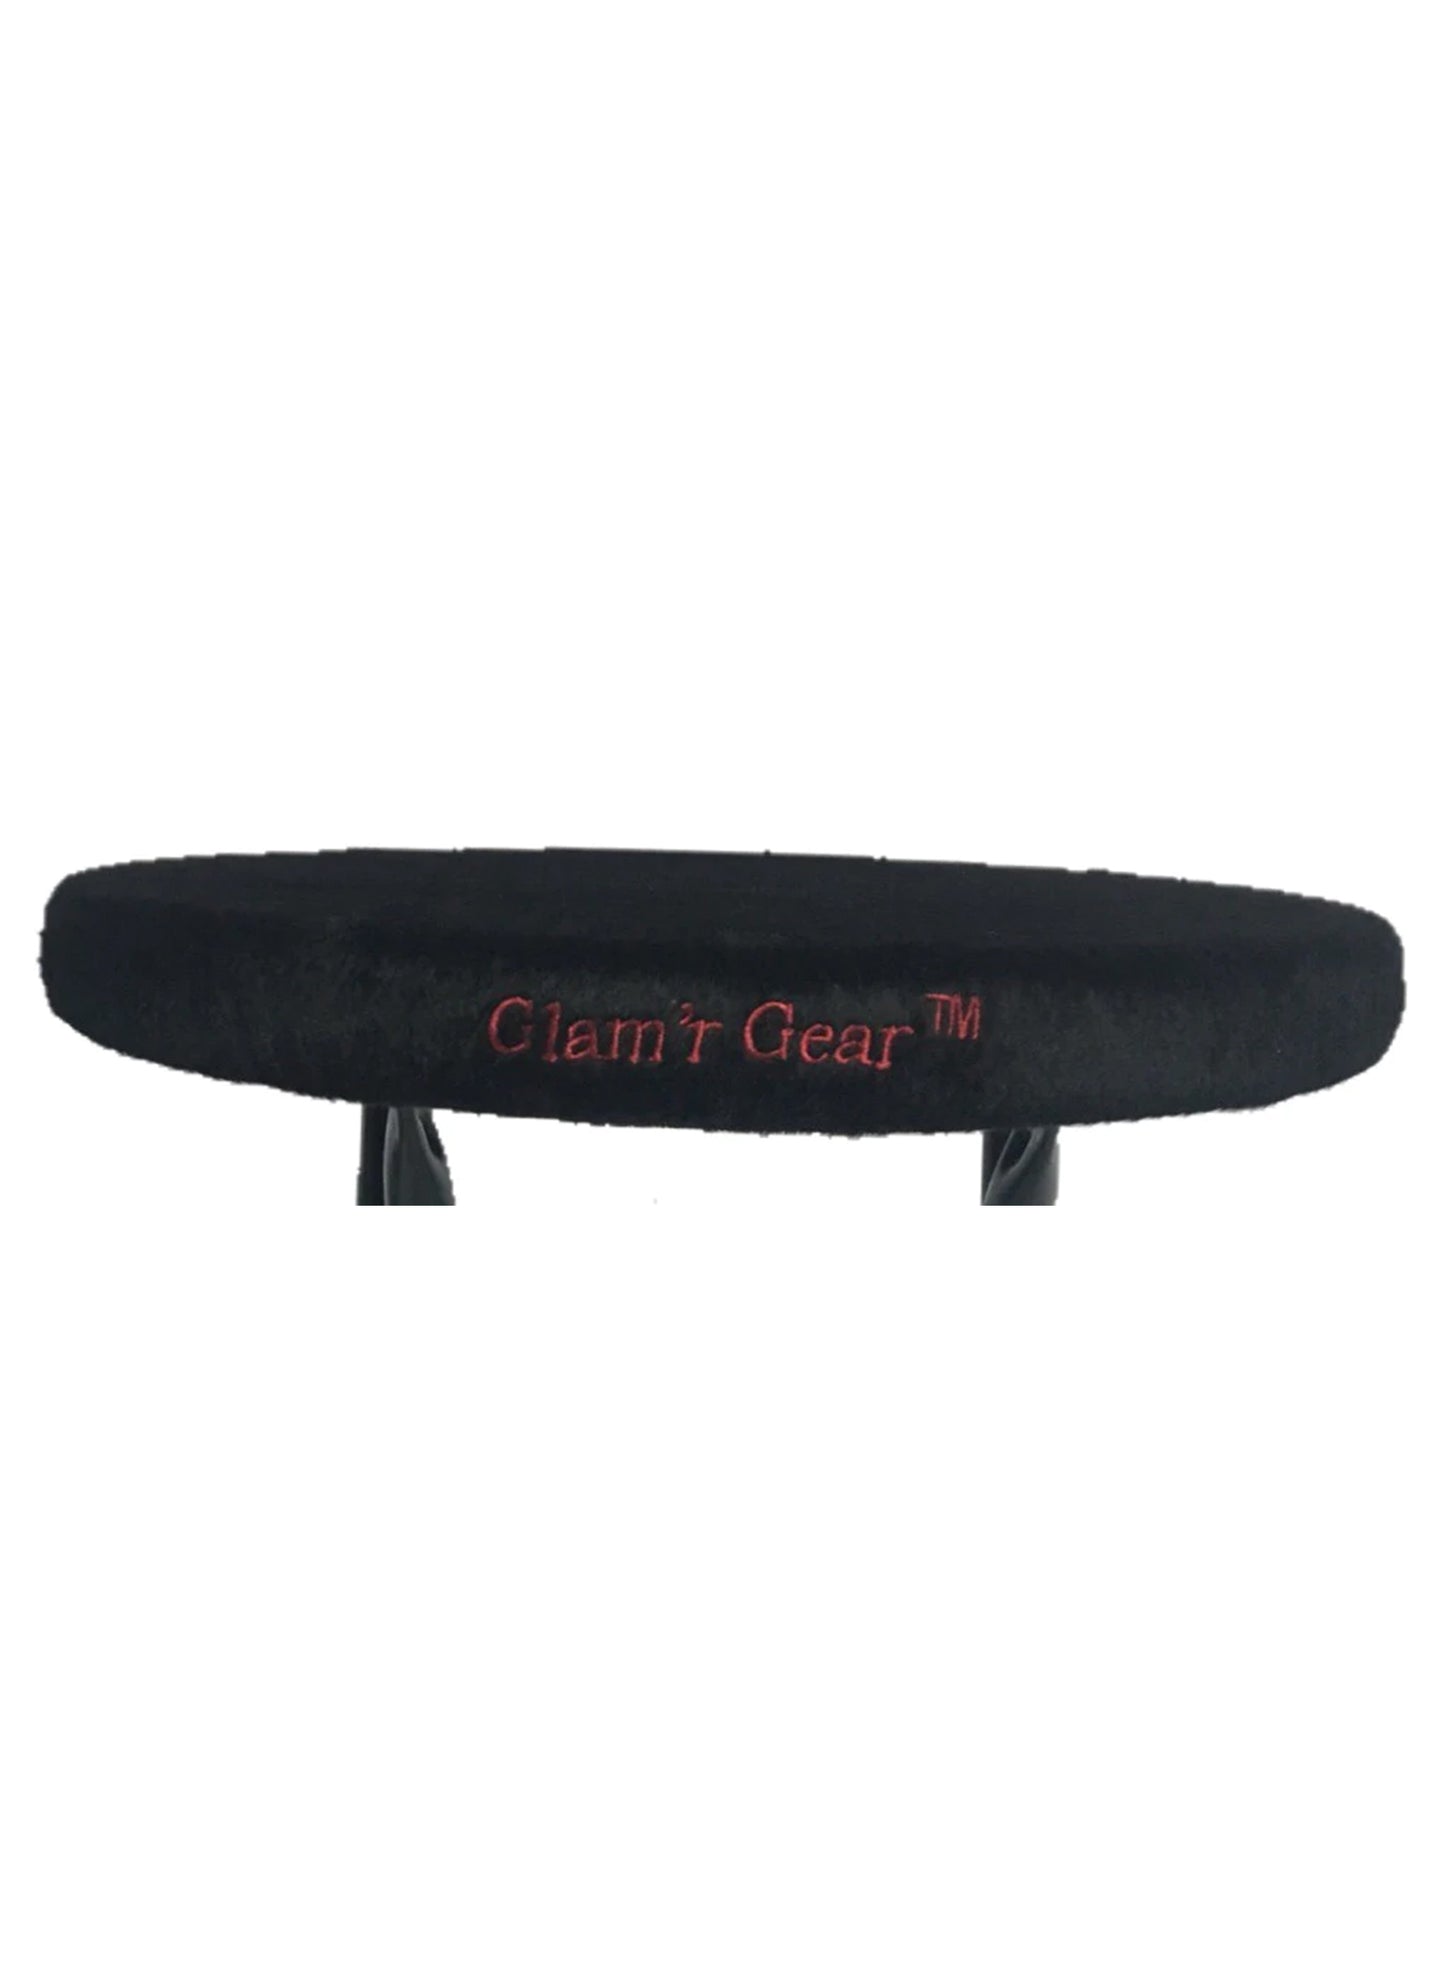 Glam'r Gear Stool Cover